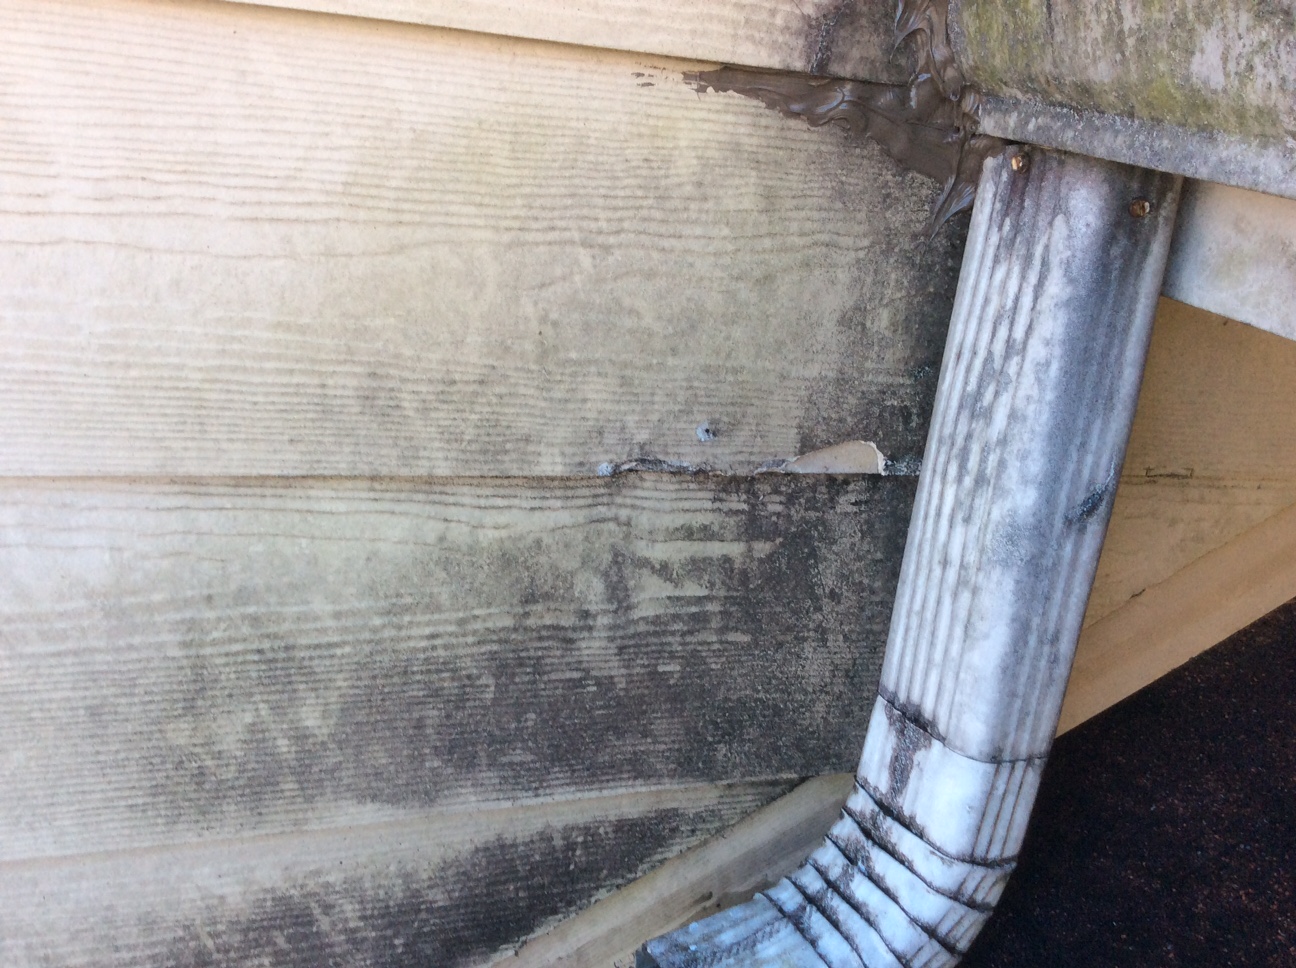 This is siding that will need to be replaced that has water damage